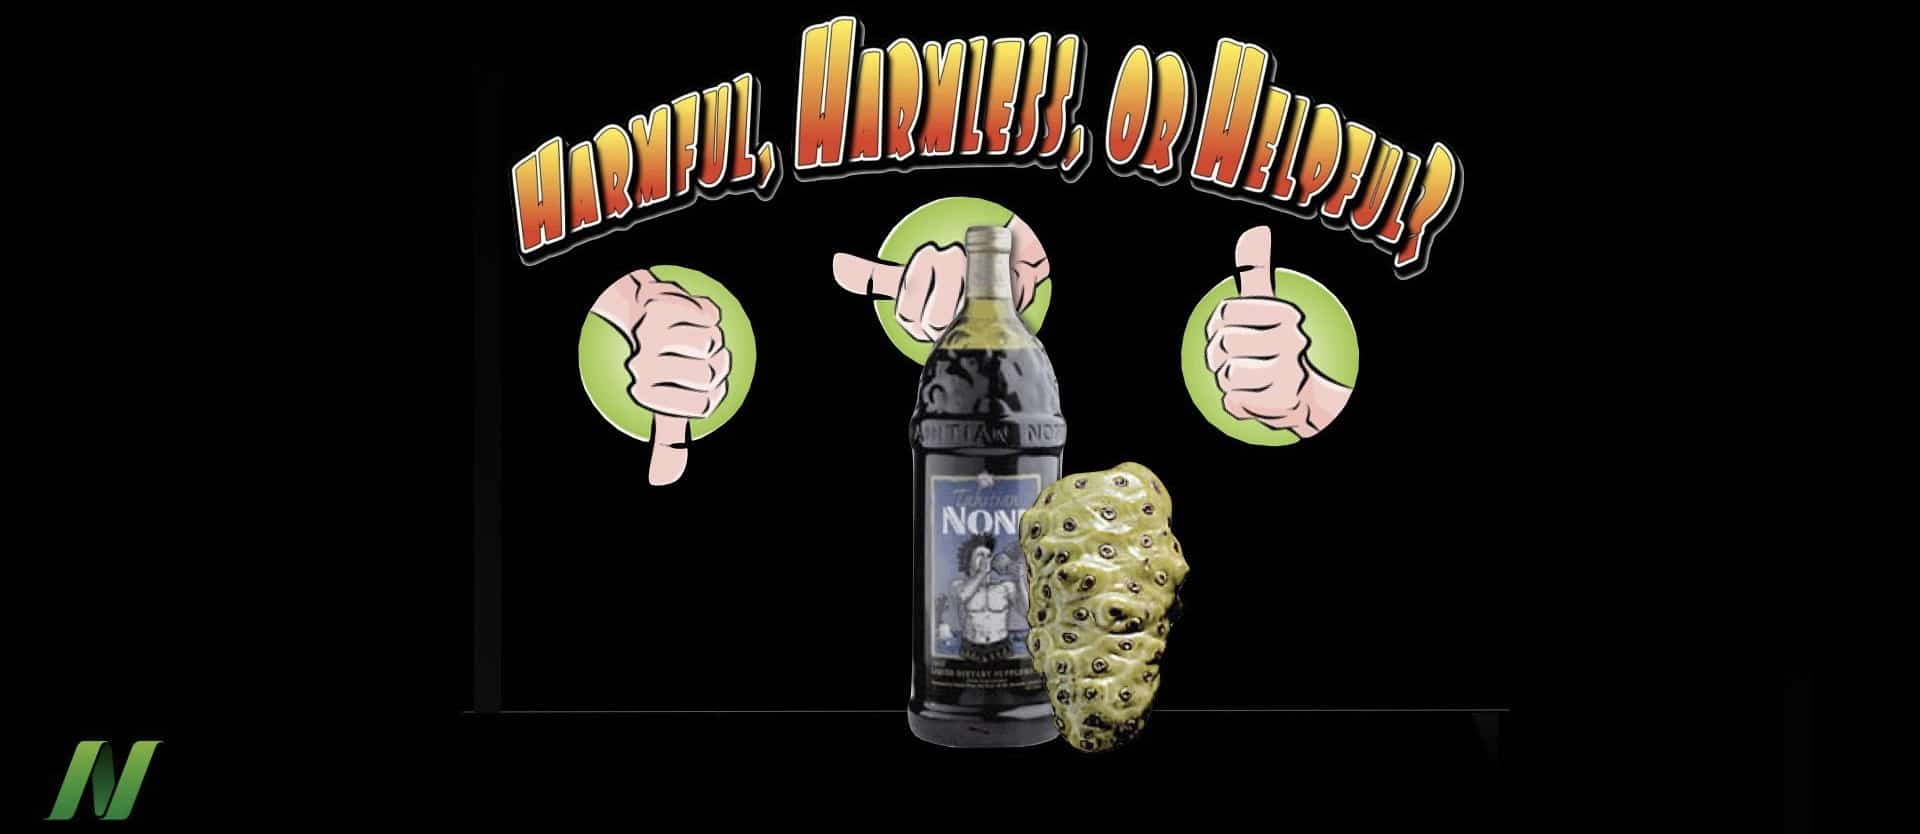 Is Noni Juice Good For You?